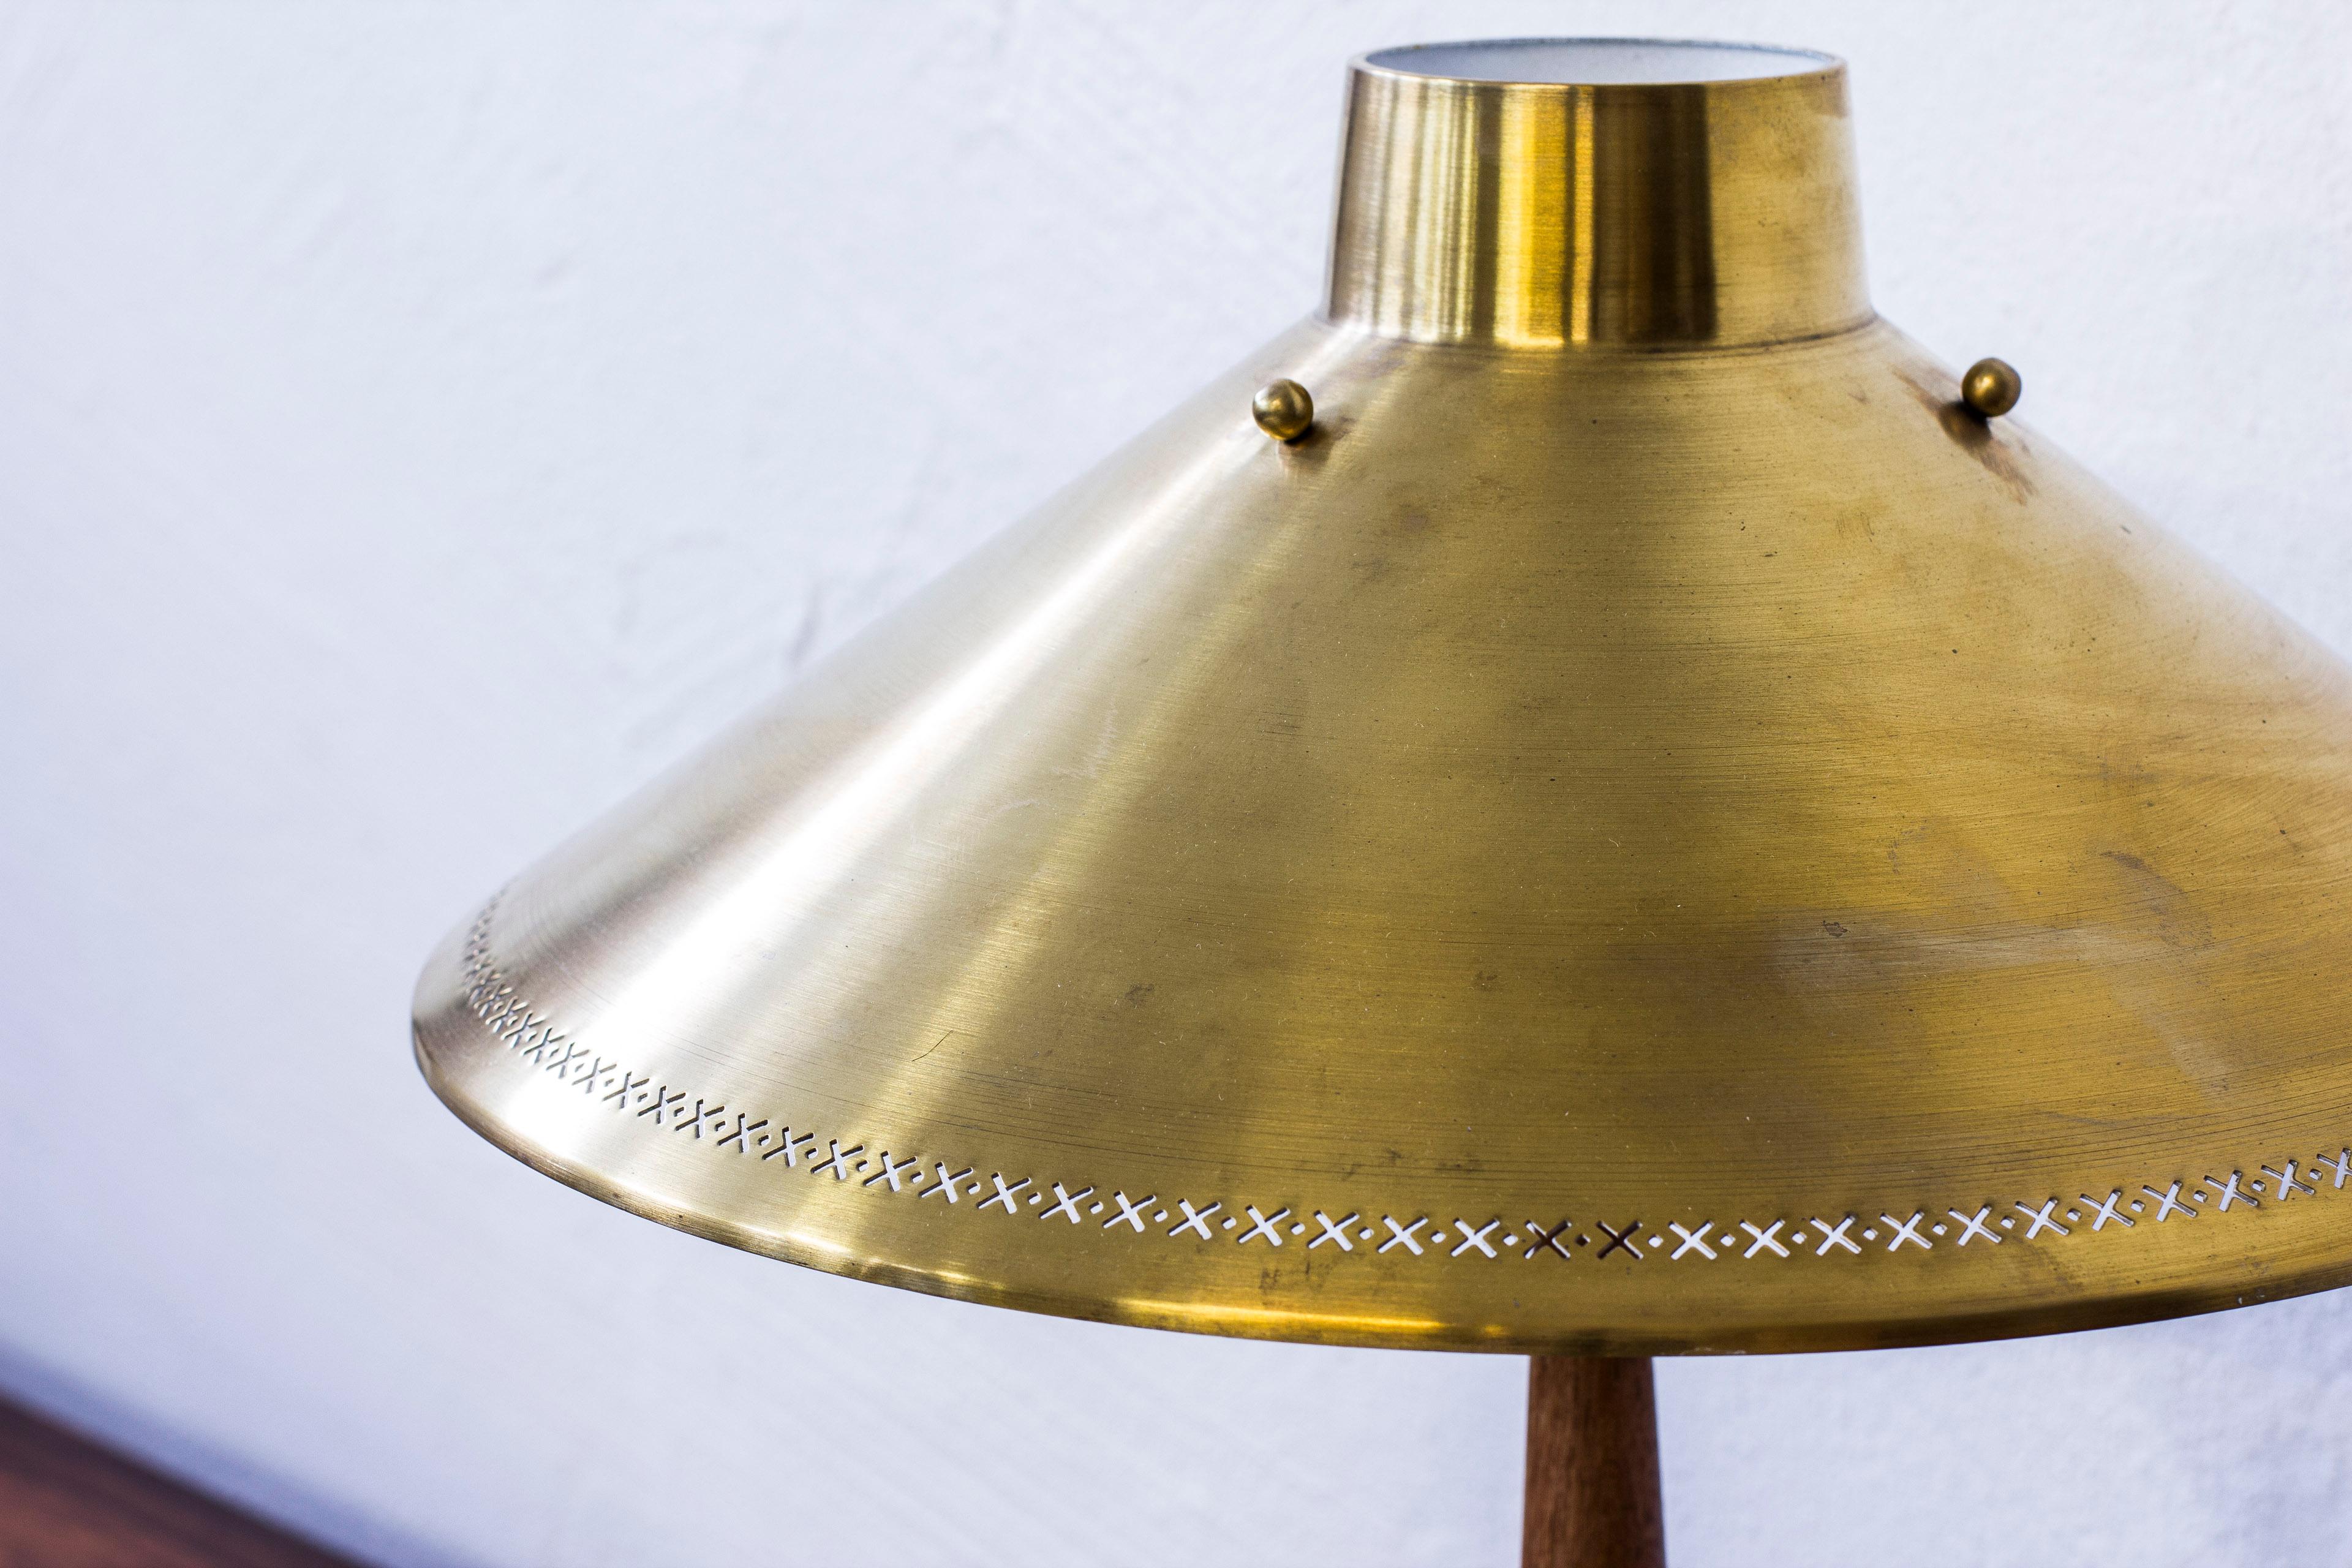 Table lamp designed by Hans Bergström. Produced by ASEA in the 1950s. Made from solid teak and polished brass. Light switch on the base in working order. Excellent condition with light signs of use and patina.